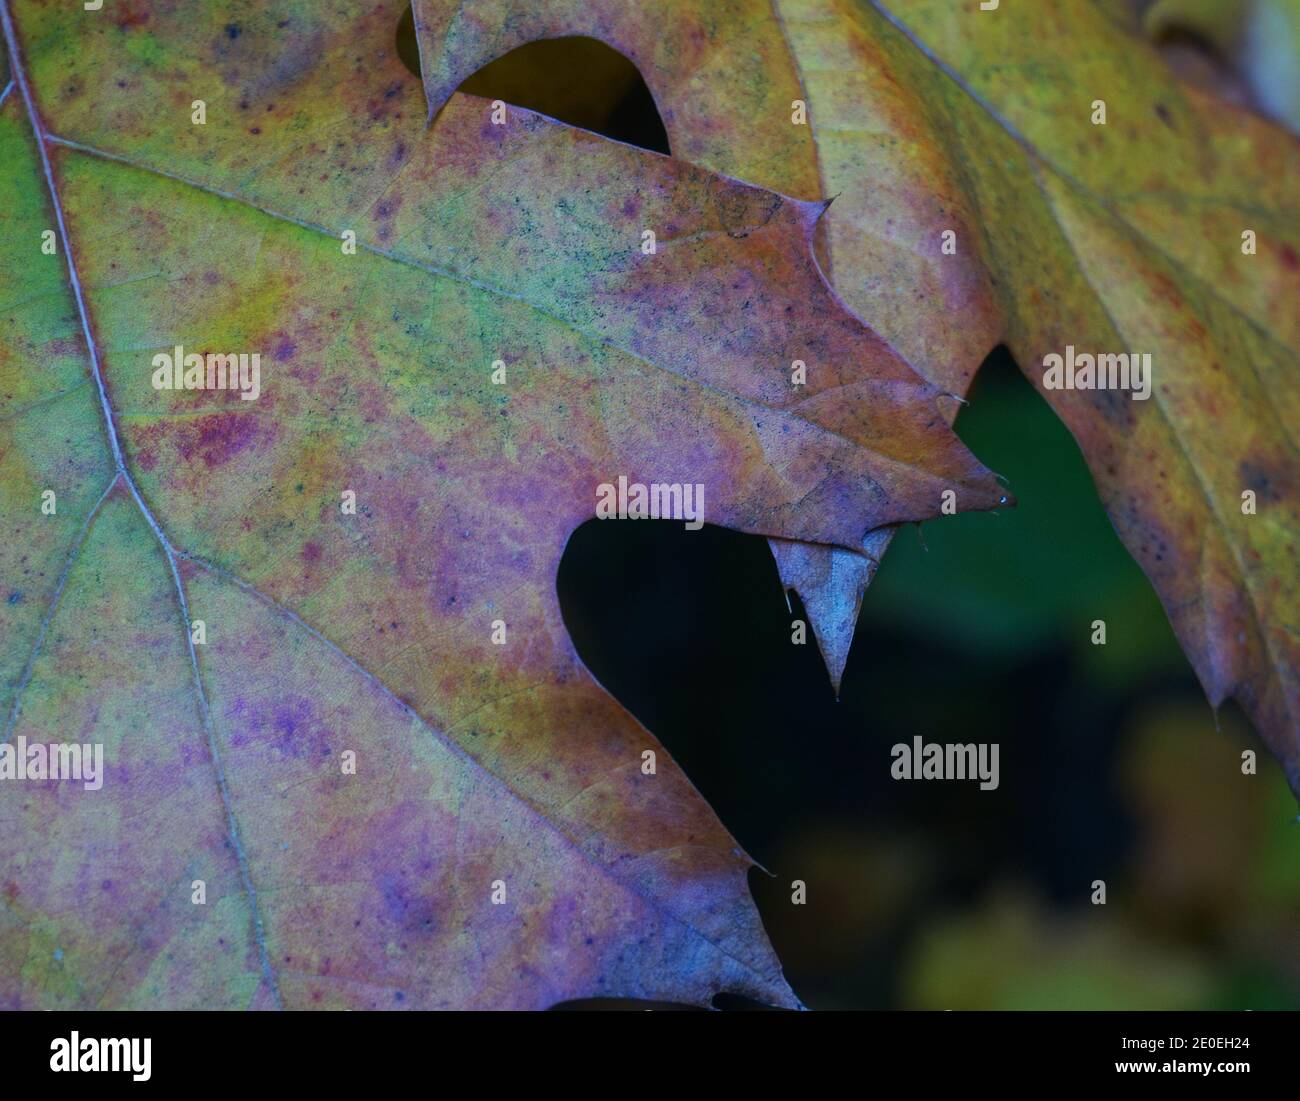 Autumn leaves of an oak in the forest. They start to change their color from green to brown. Stock Photo